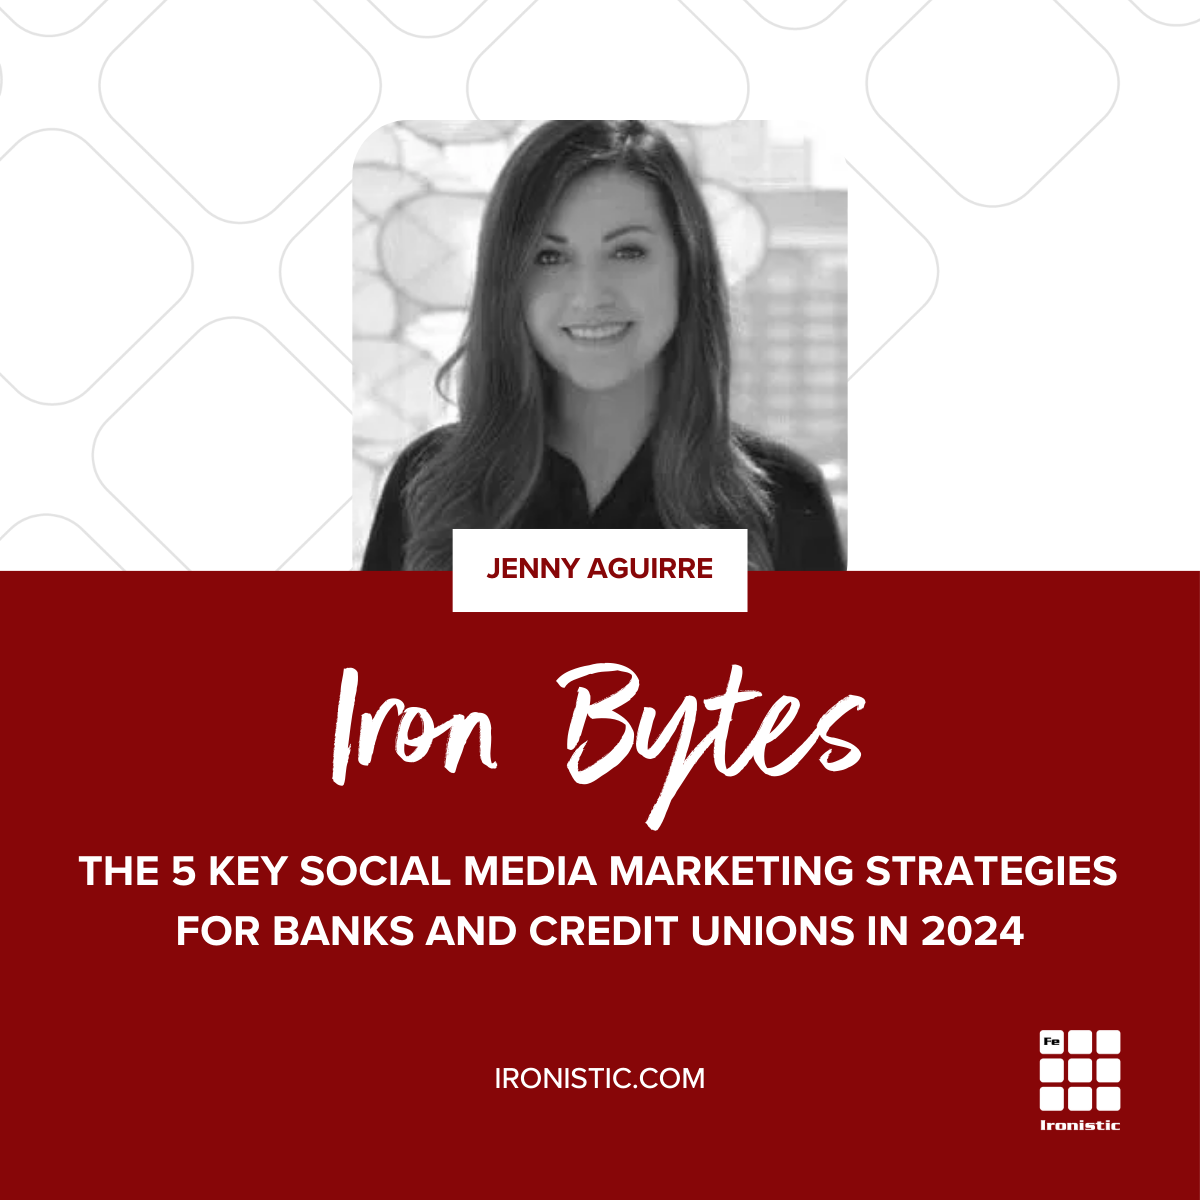 Iron Bytes with Jenny Aguirre - The 5 Key Social Media Marketing Strategies for Banks and Credit Unions in 2024